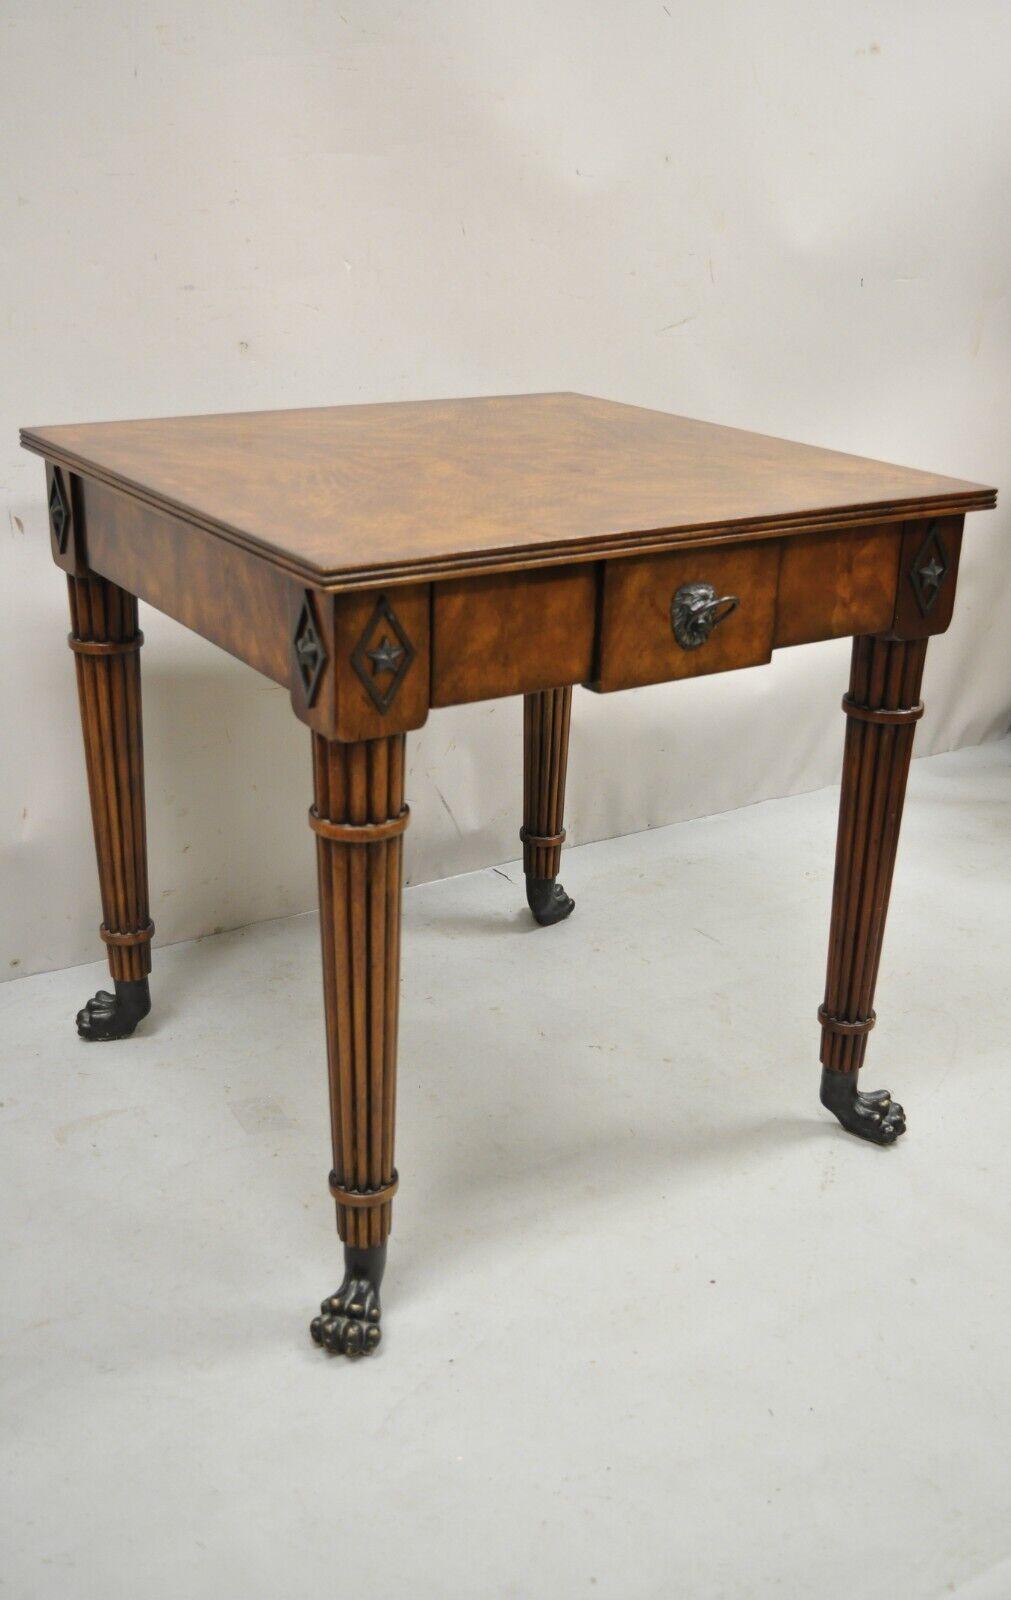 Theodore Alexander Althorp Regency Mahogany One Drawer Side Table A L50046. Item features signed to interior of drawer, bronze paw feet, beautiful wood grain, 1 drawer, tapered legs, quality craftsmanship, great style and form. Circa late 20th